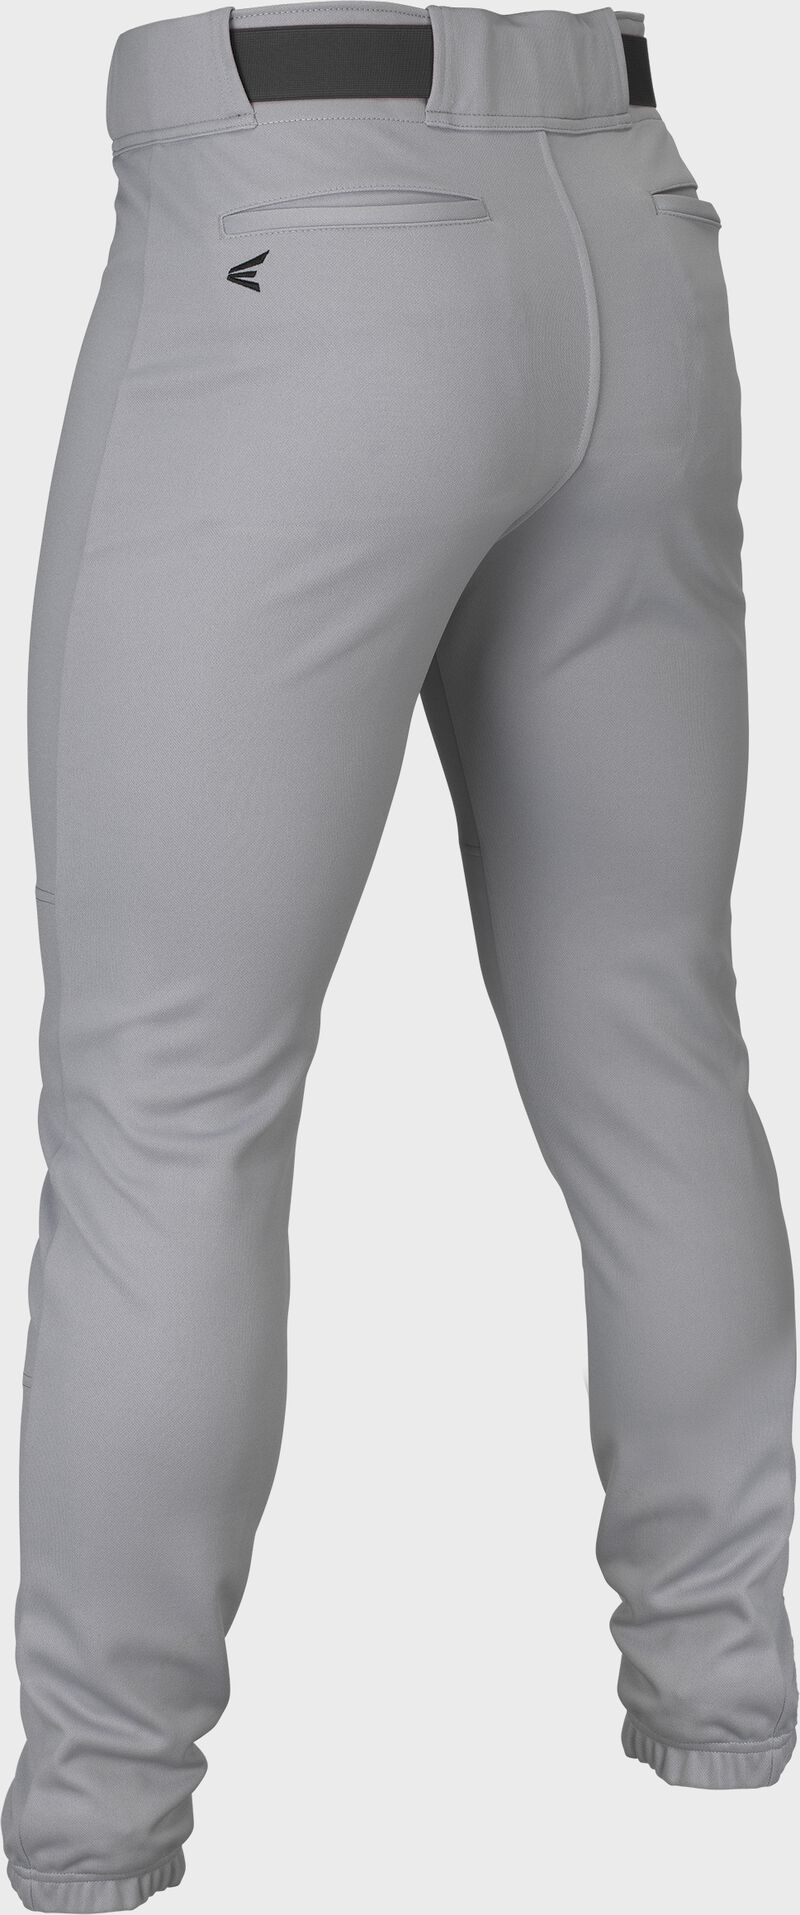 Rival+ Pro Taper Pant Youth GREY M loading=